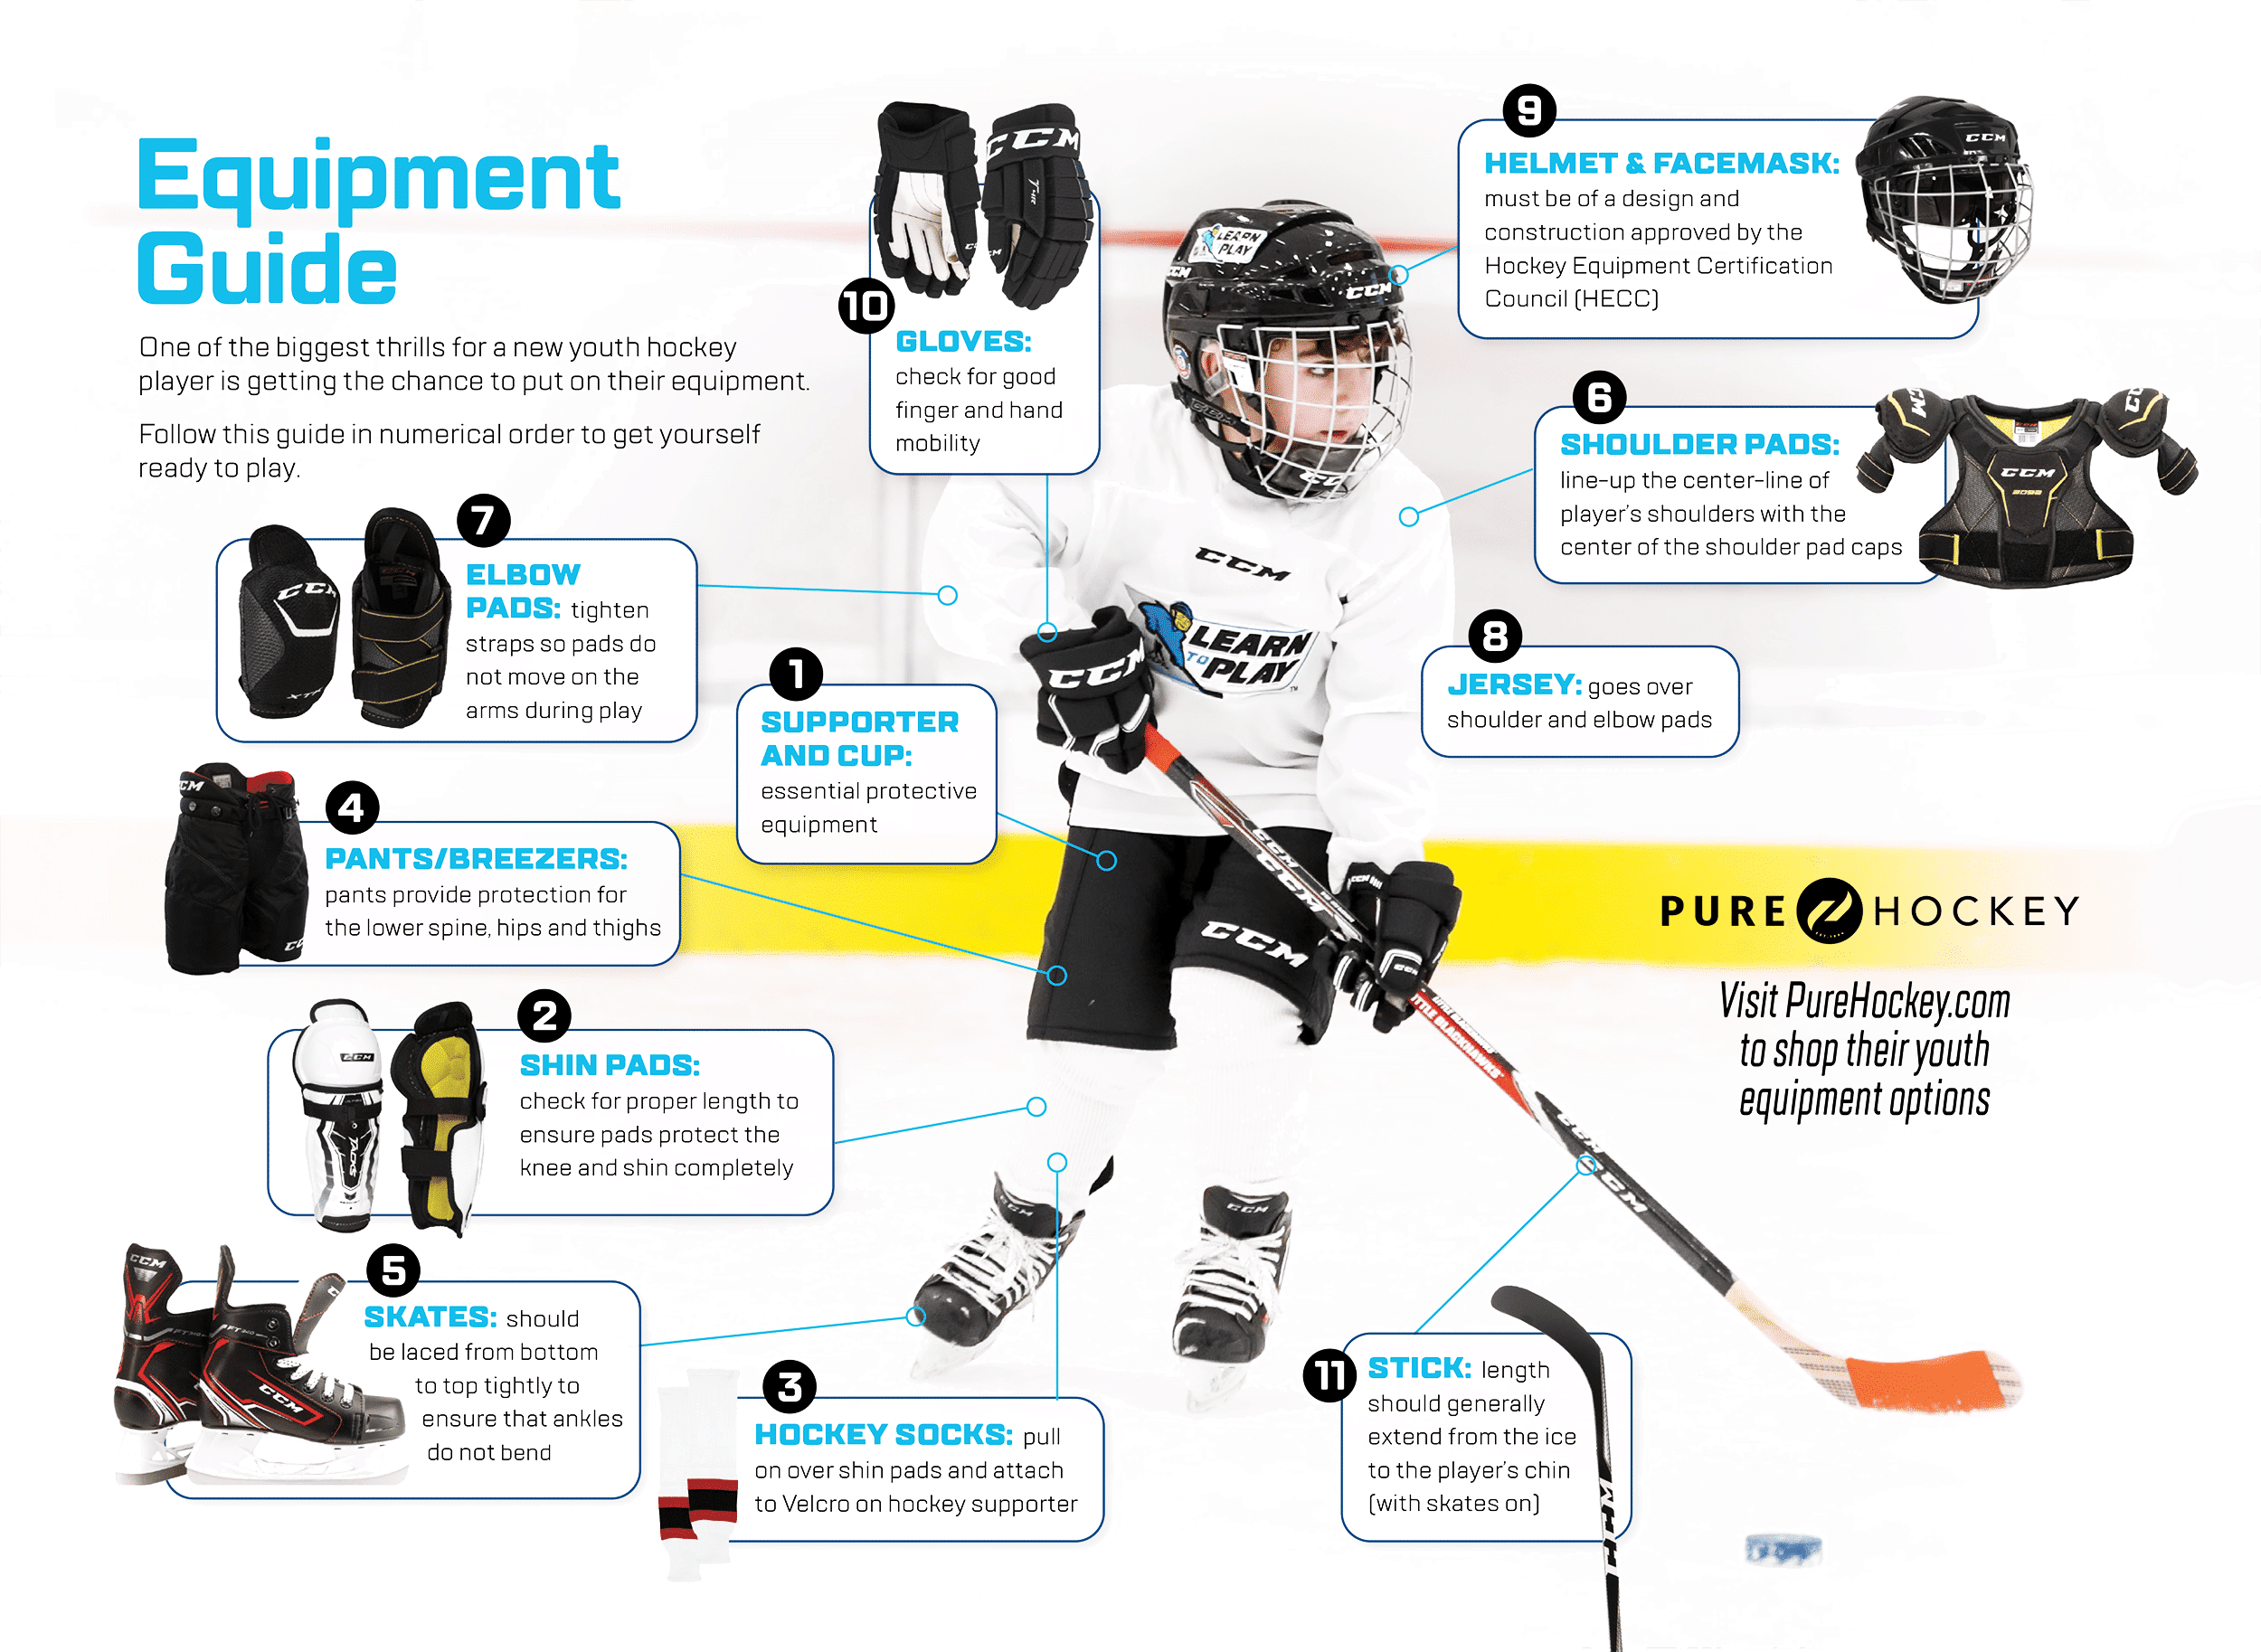 Are There Any Specific Safety Guidelines for Kids Participating in Junior Hockey?